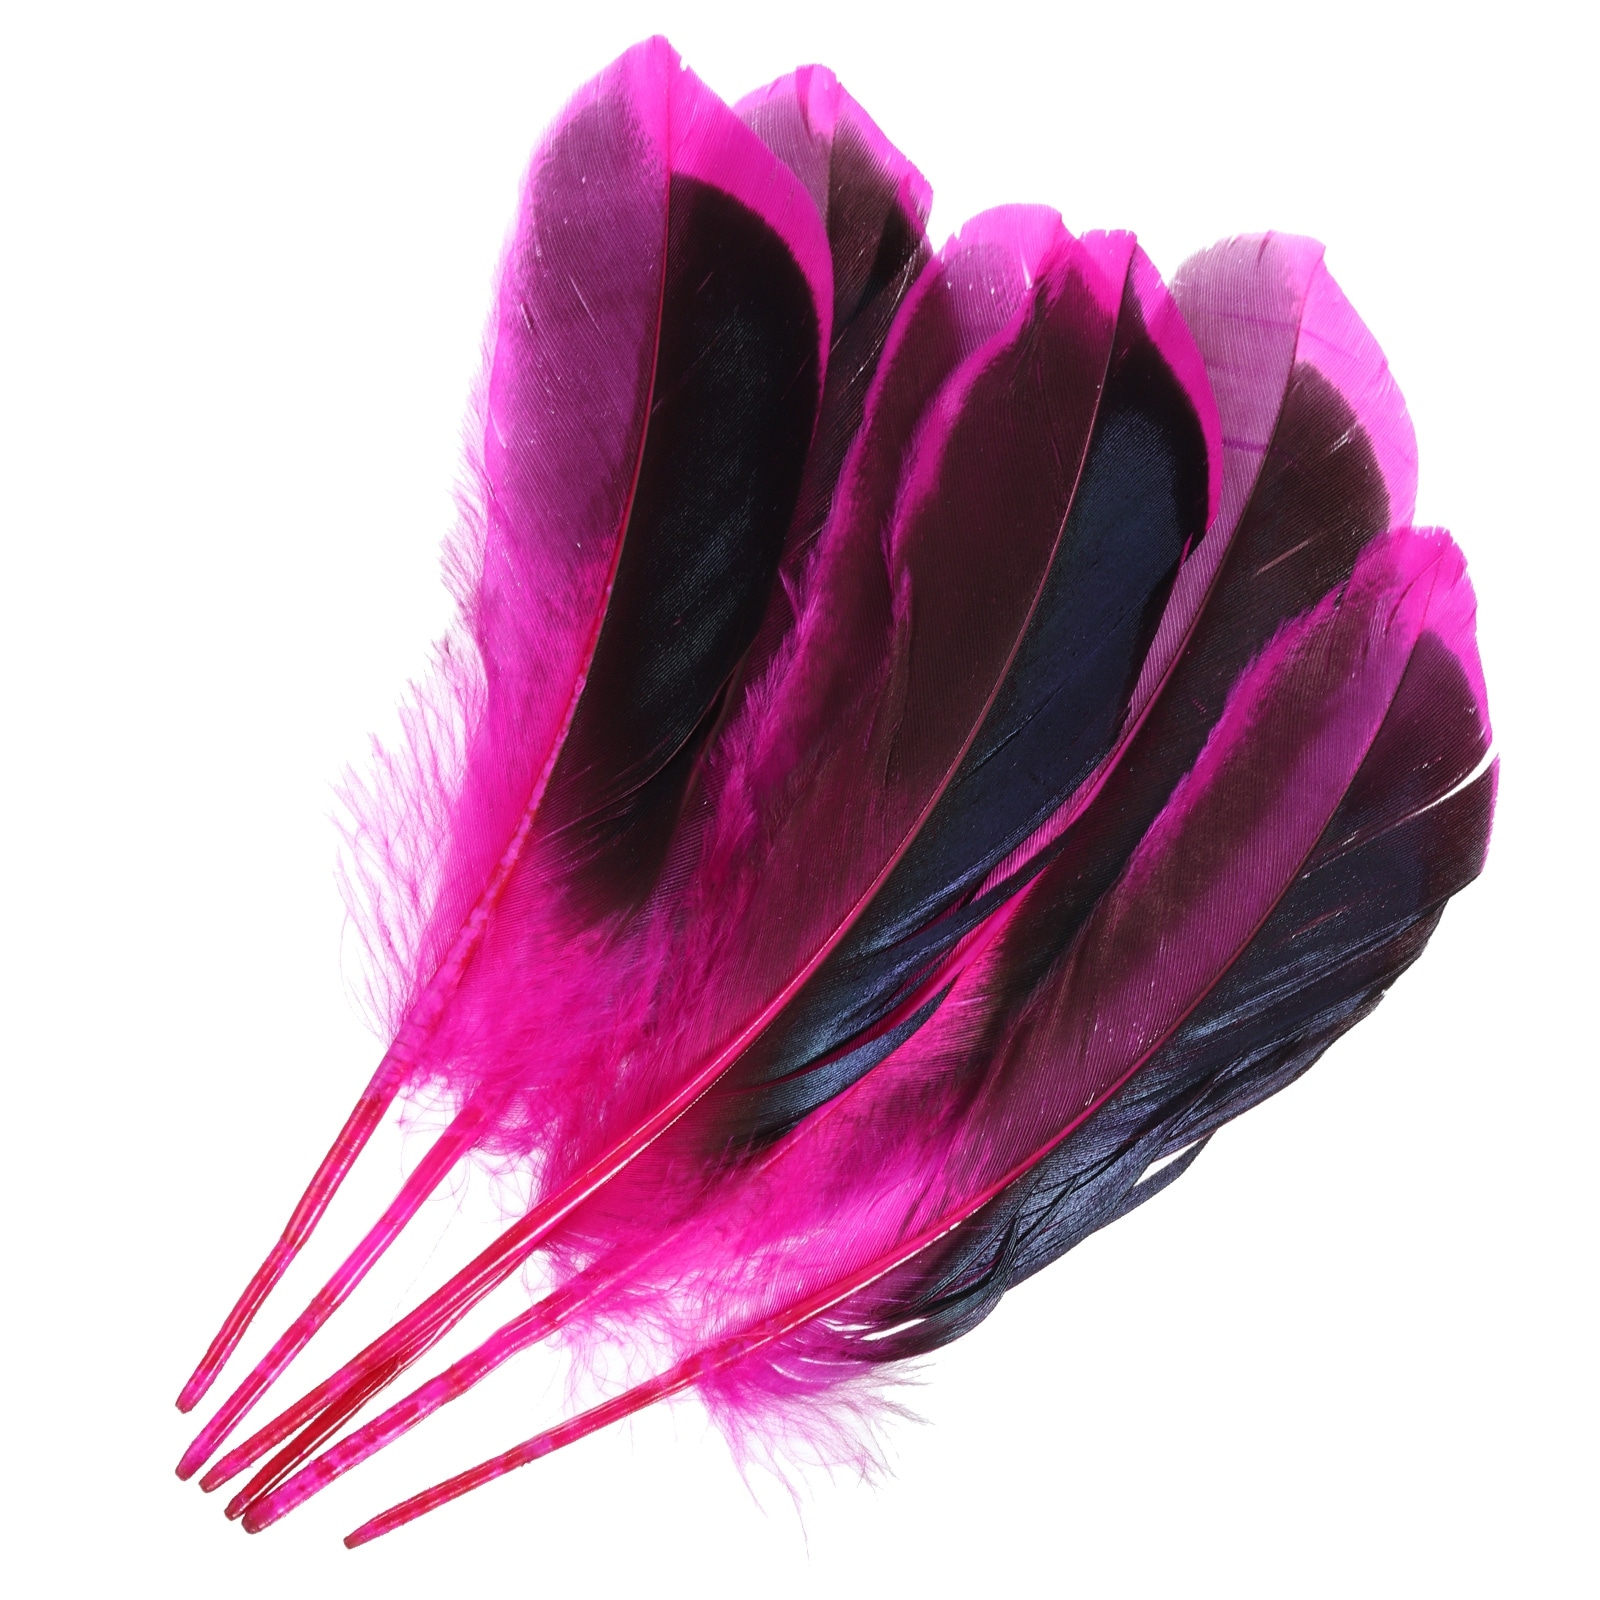 Rose Red Goose Feathers 6-8 Inch bulk Assorted Colorful Feathers